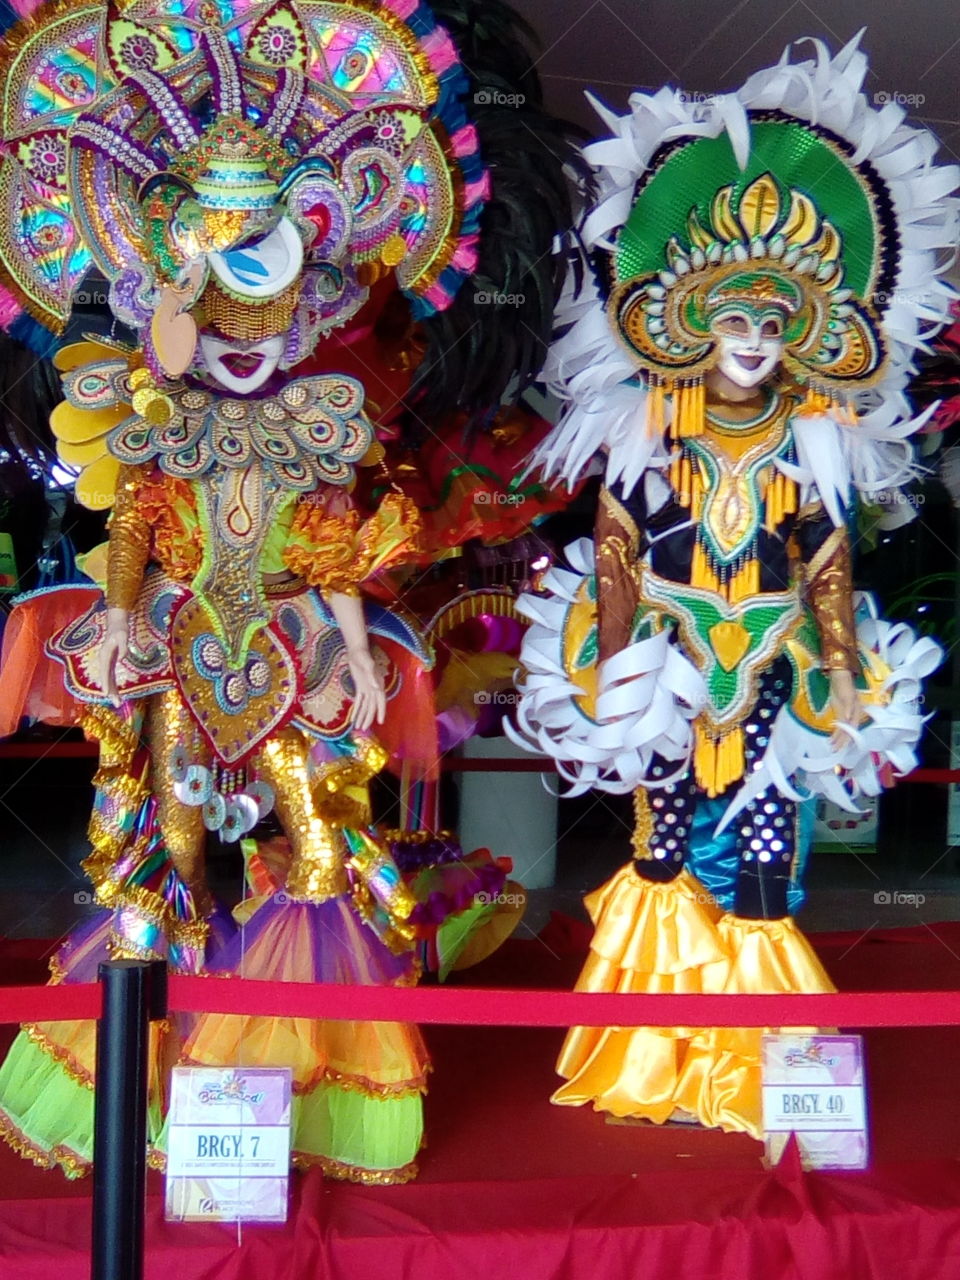 October is masskara day in bacolod